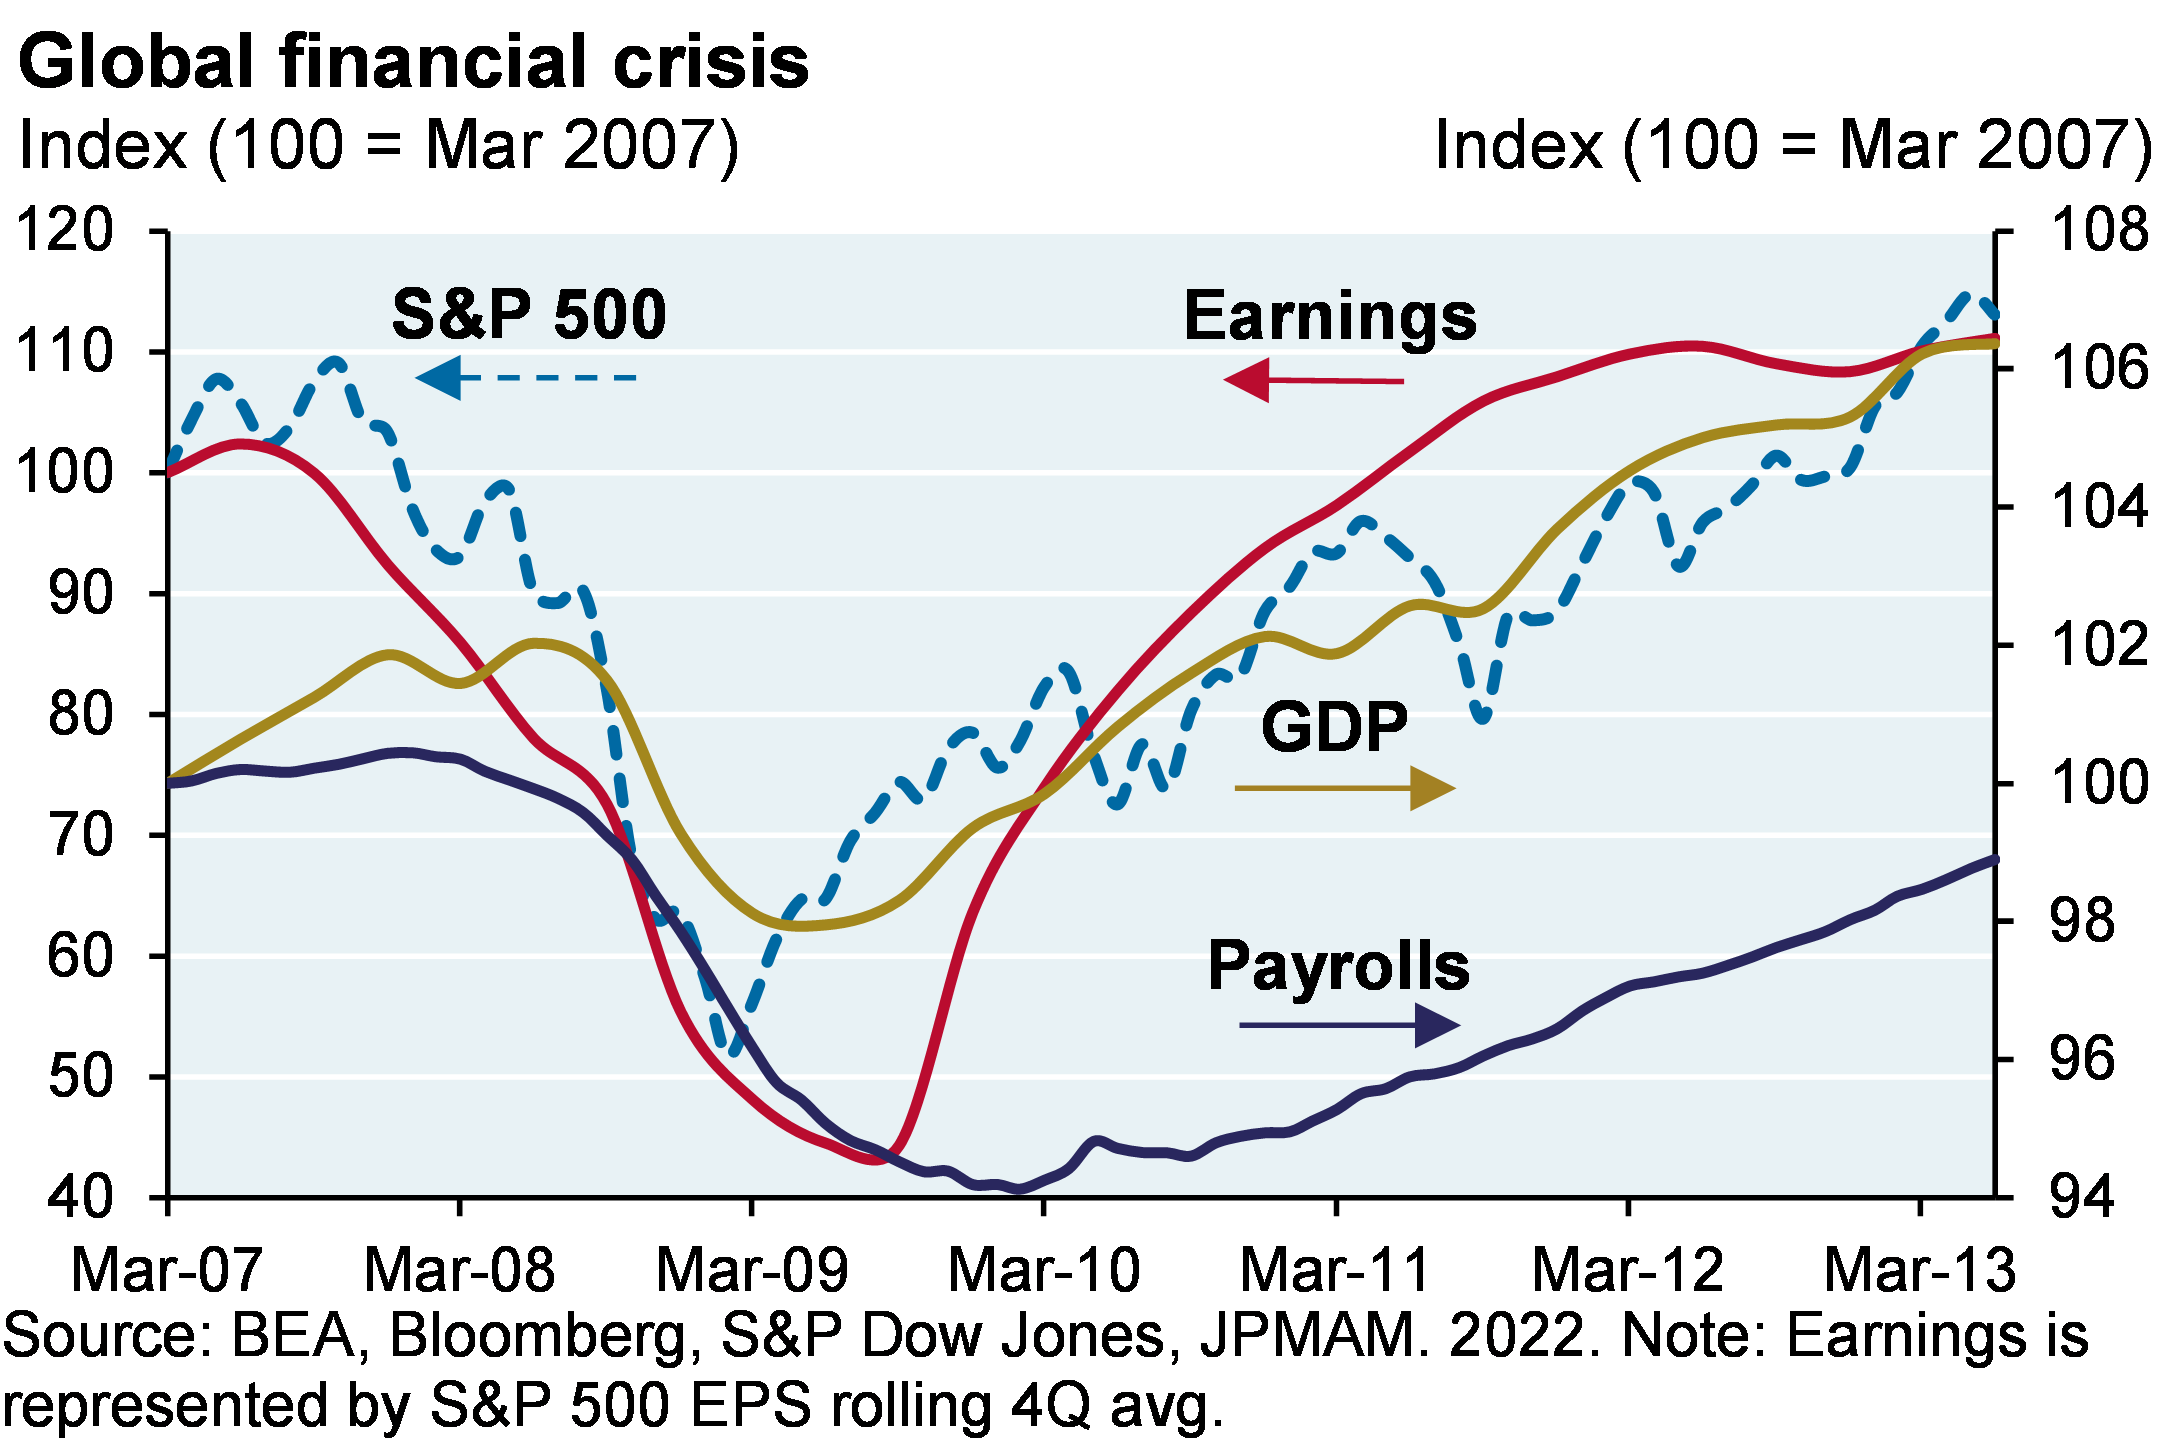 The indexed line chart compares the S&P 500, GDP, Earnings, and Nonfarm Payrolls throughout the Global financial crisis from March 2007 to June 2013. The S&P 500 bottomed in February 2009, followed by GDP in June 2009, Earnings in September 2009 and Payrolls in February 2010. 